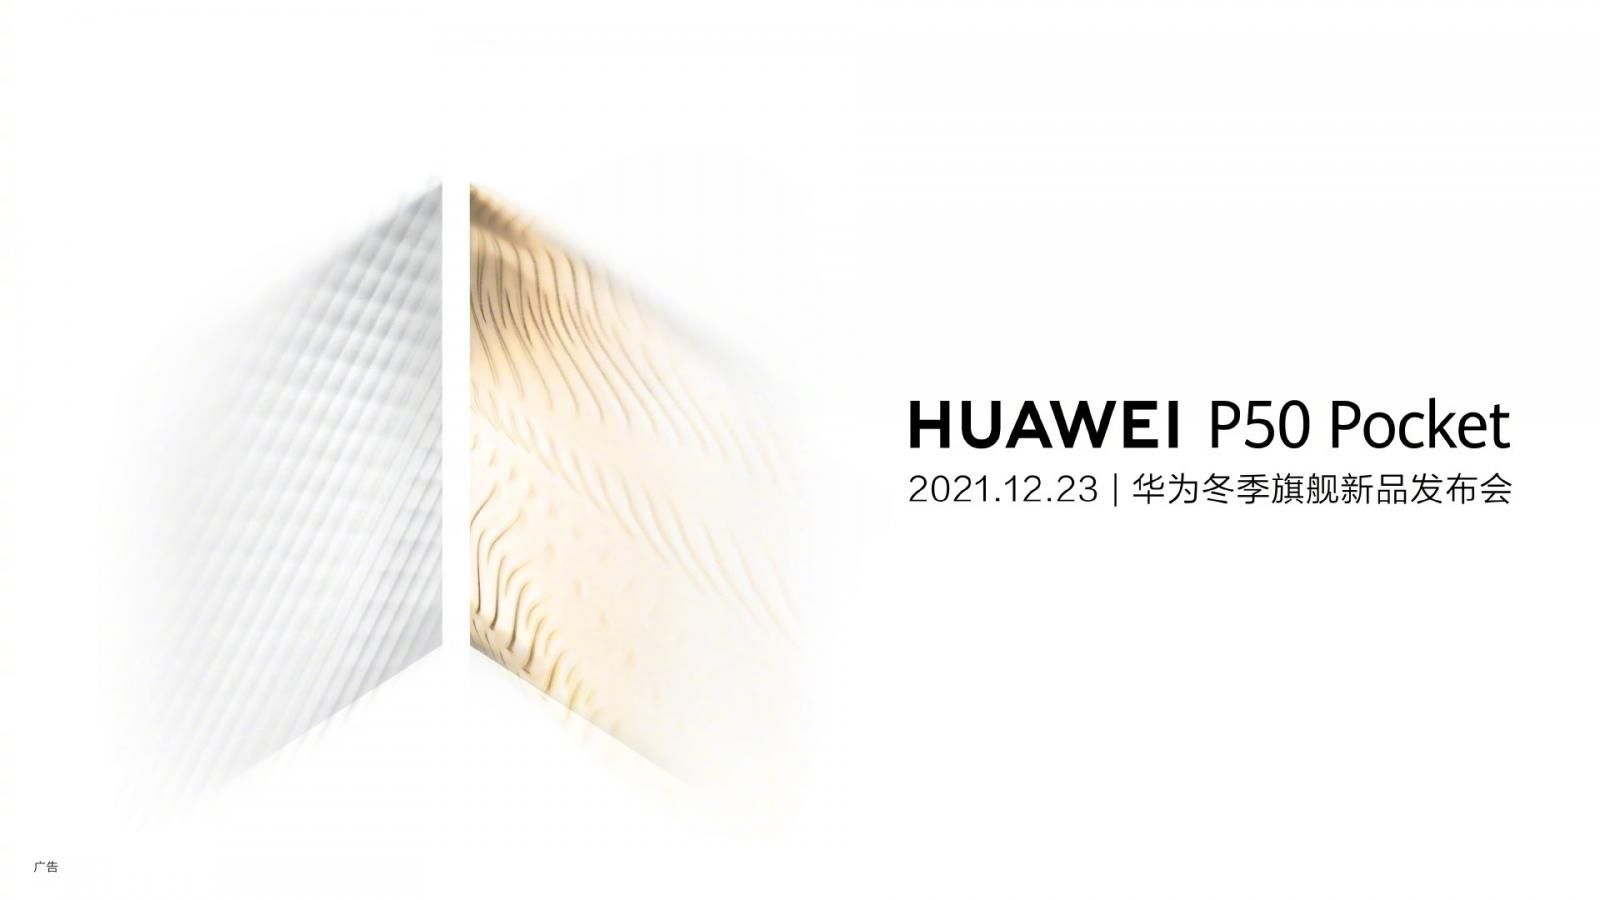 HUAWEI P50 Pocket announcement